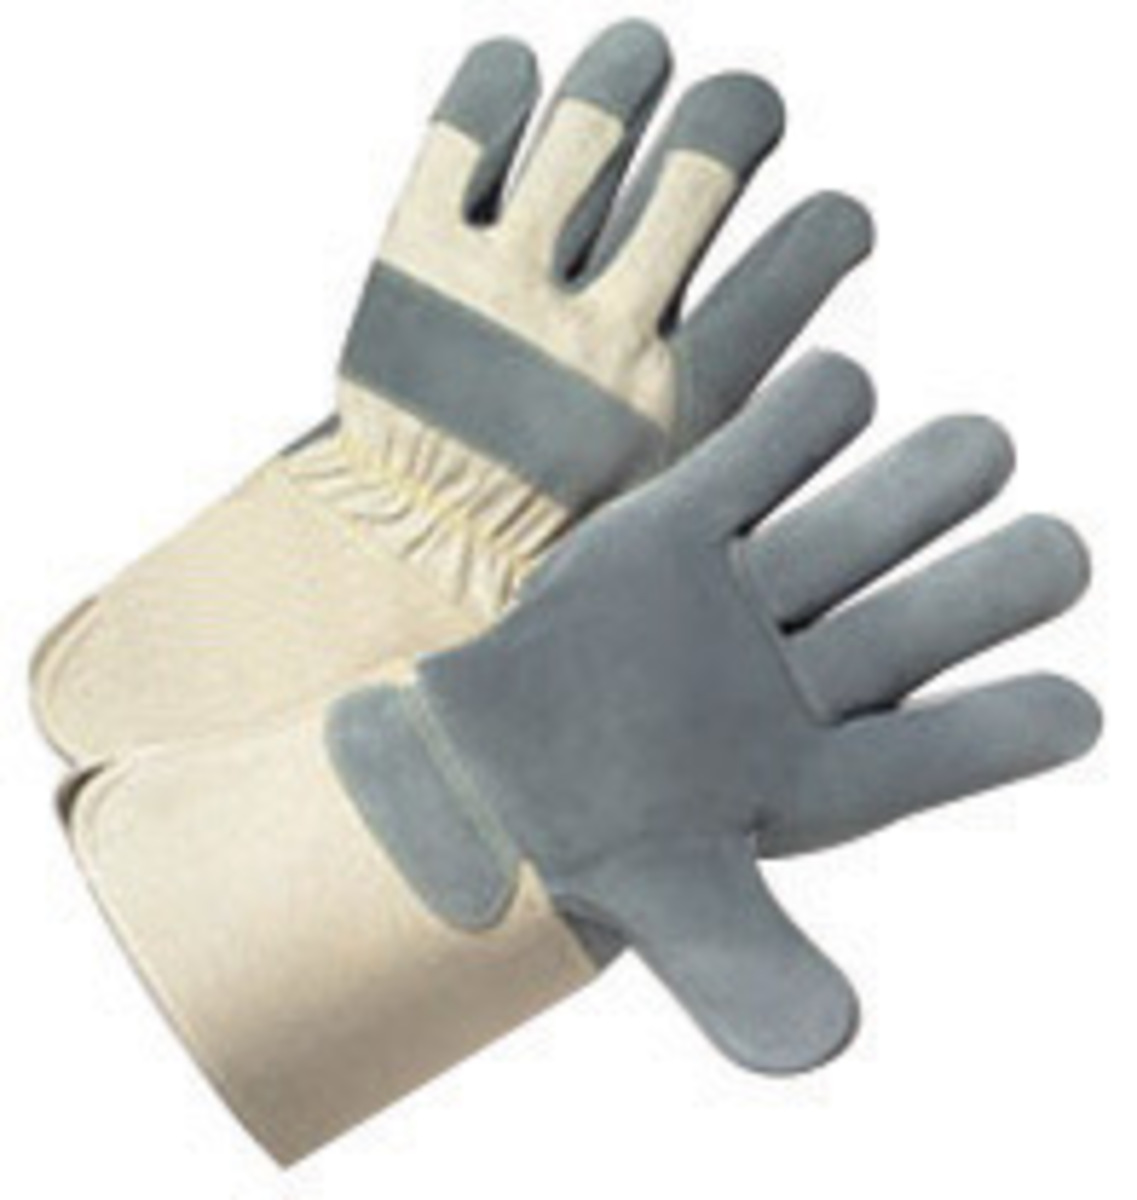 PIP® X-Large Premium Split Leather Palm Gloves With Canvas Back And Rubberized Gauntlet Cuff